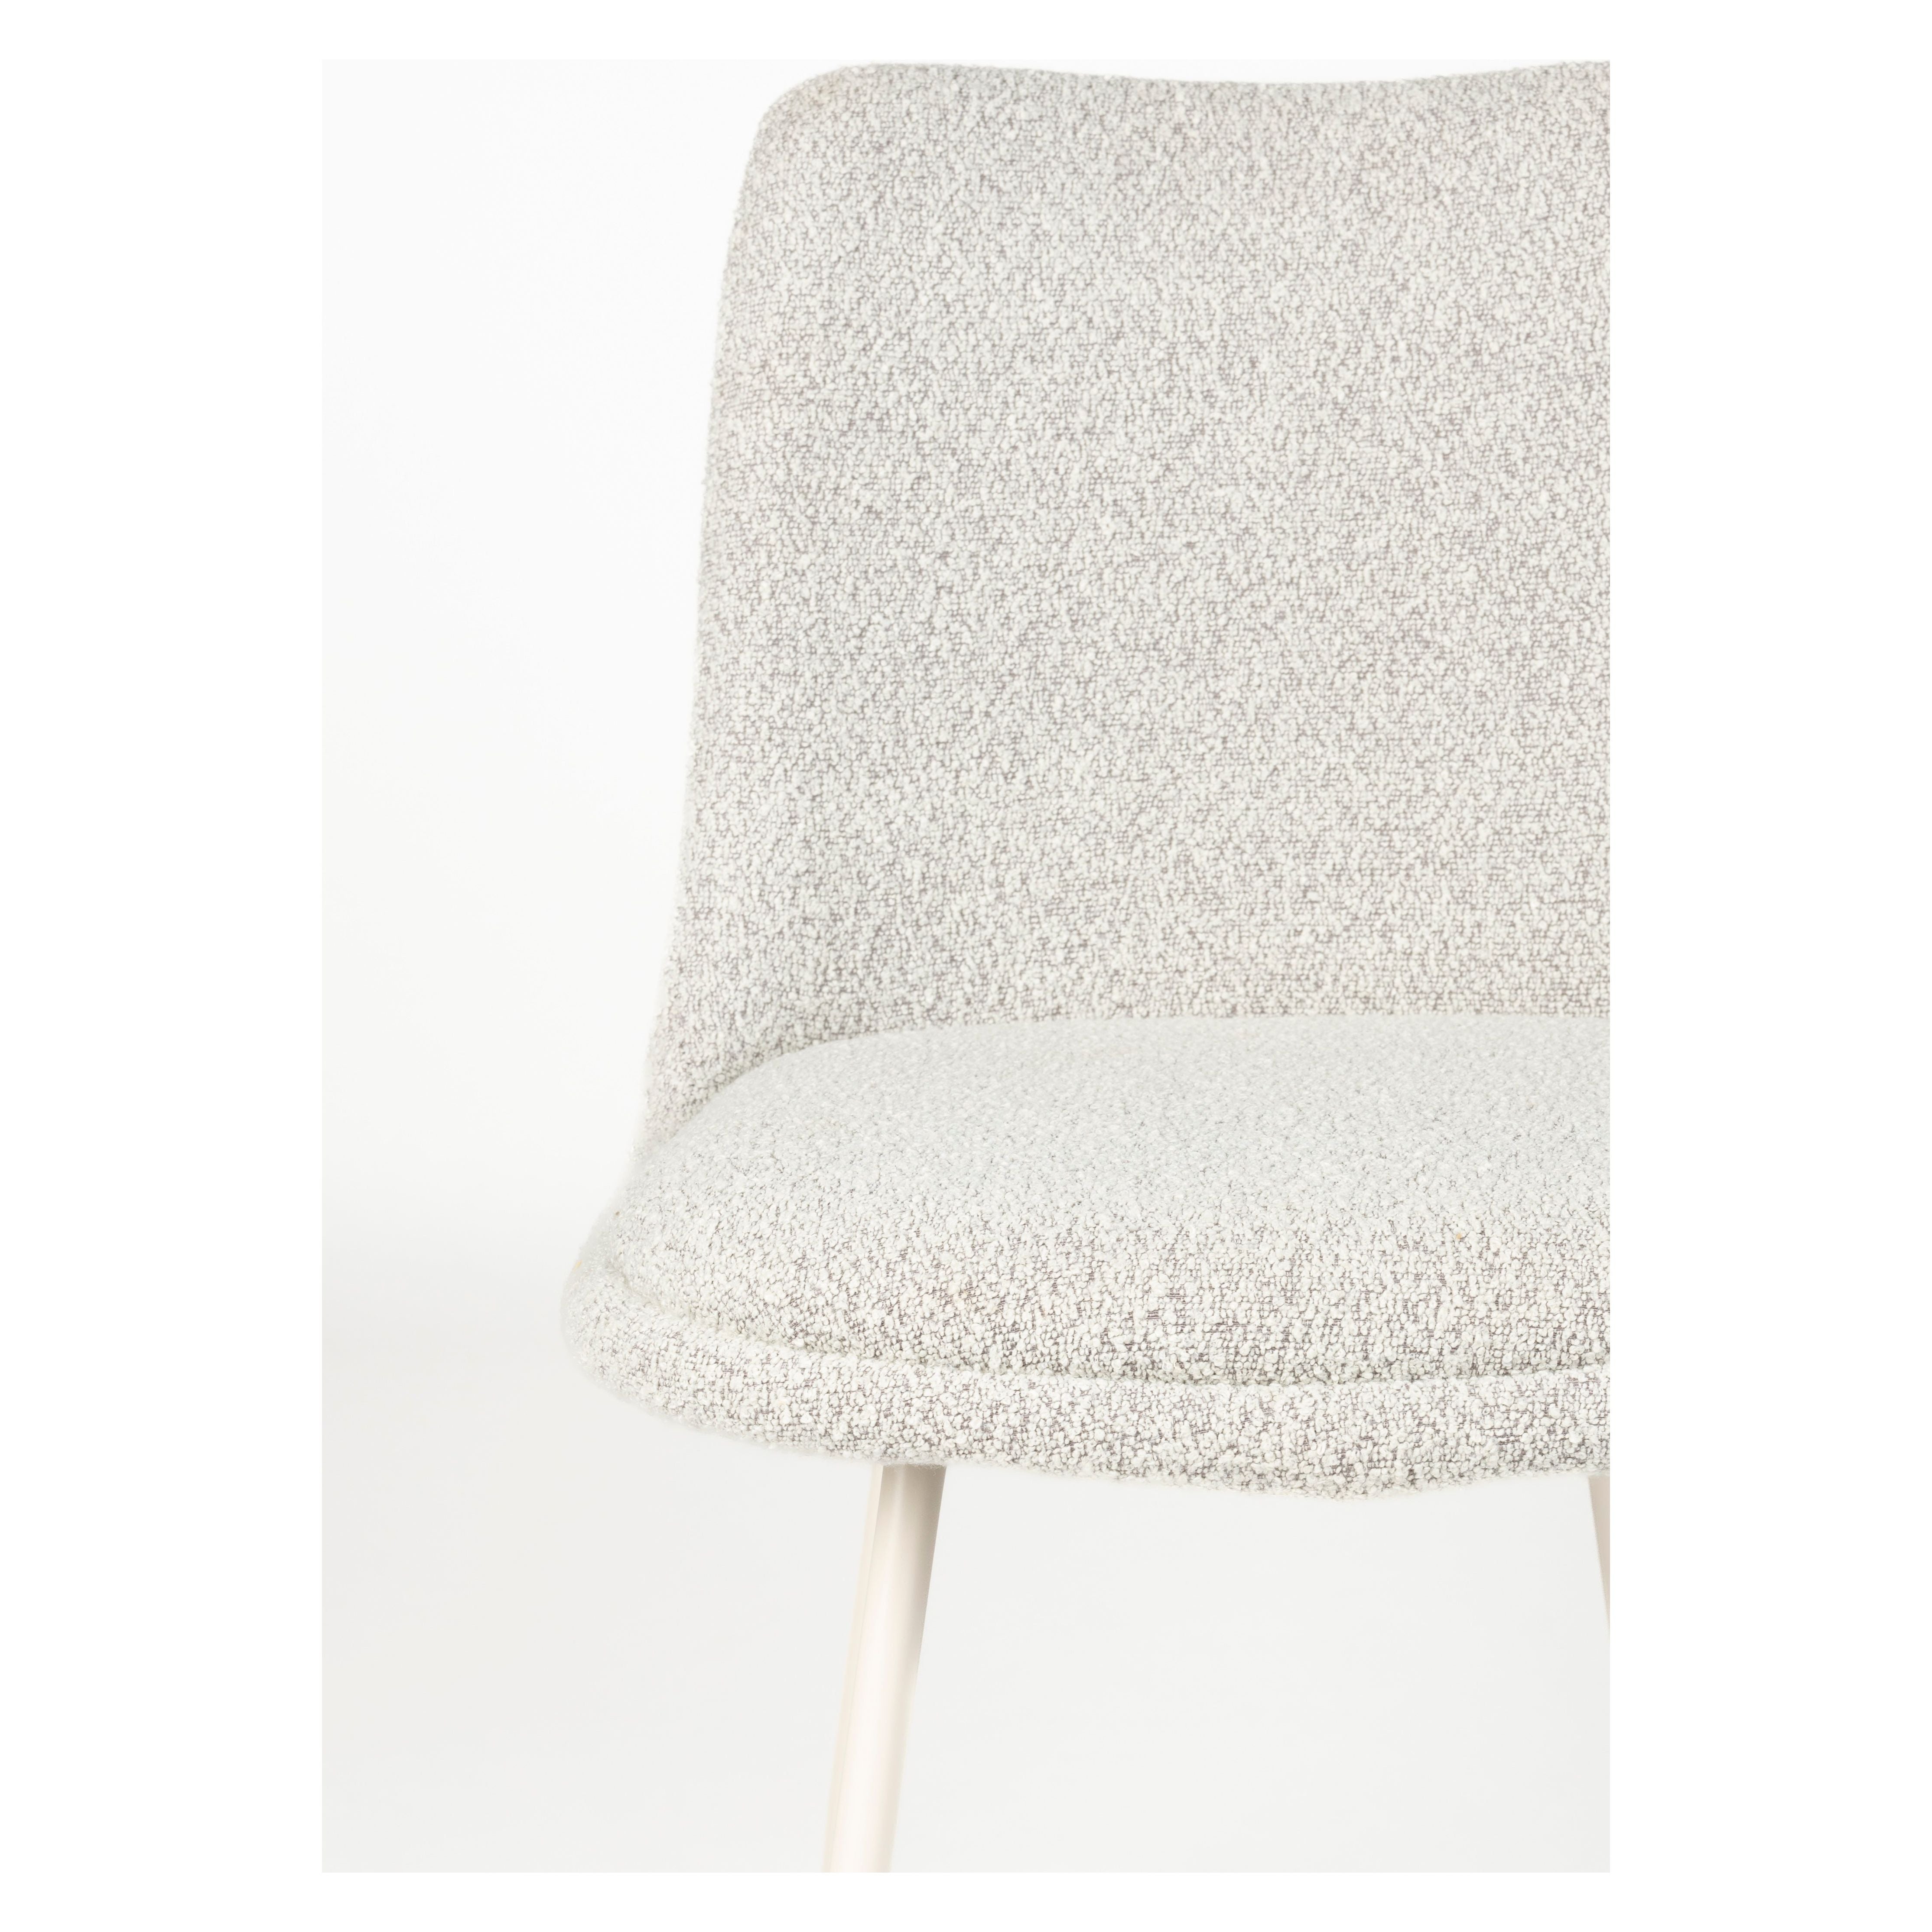 Chair fijs off white | 2 pieces